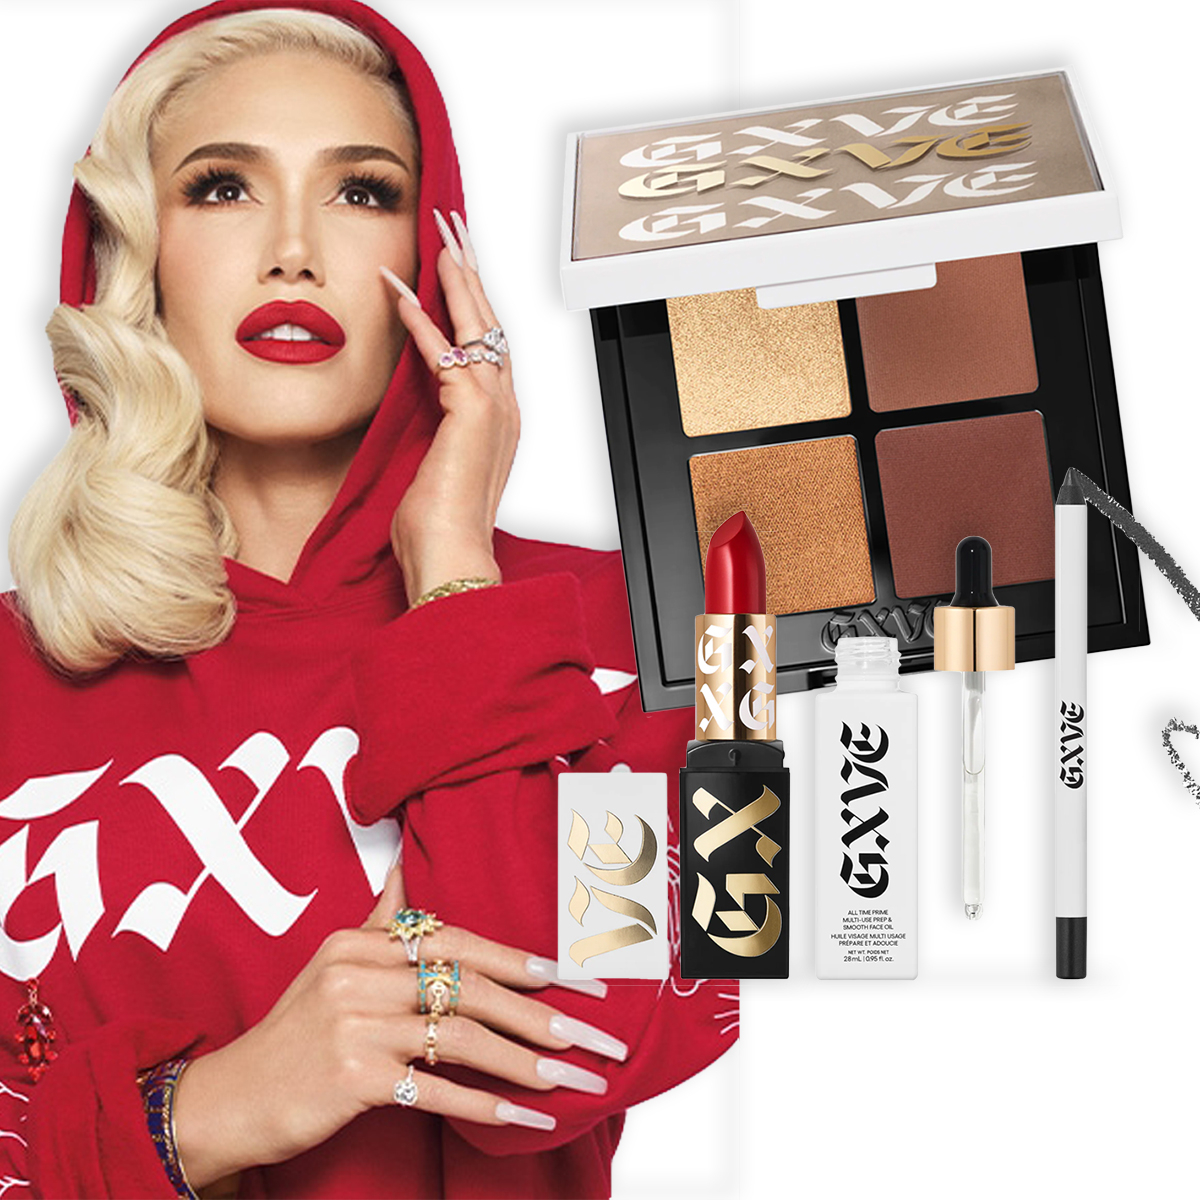 søvn svimmelhed Fremmedgøre Is GXVE by Gwen Stefani “Hella Good?” Here's What Reviewers Are Saying - E!  Online